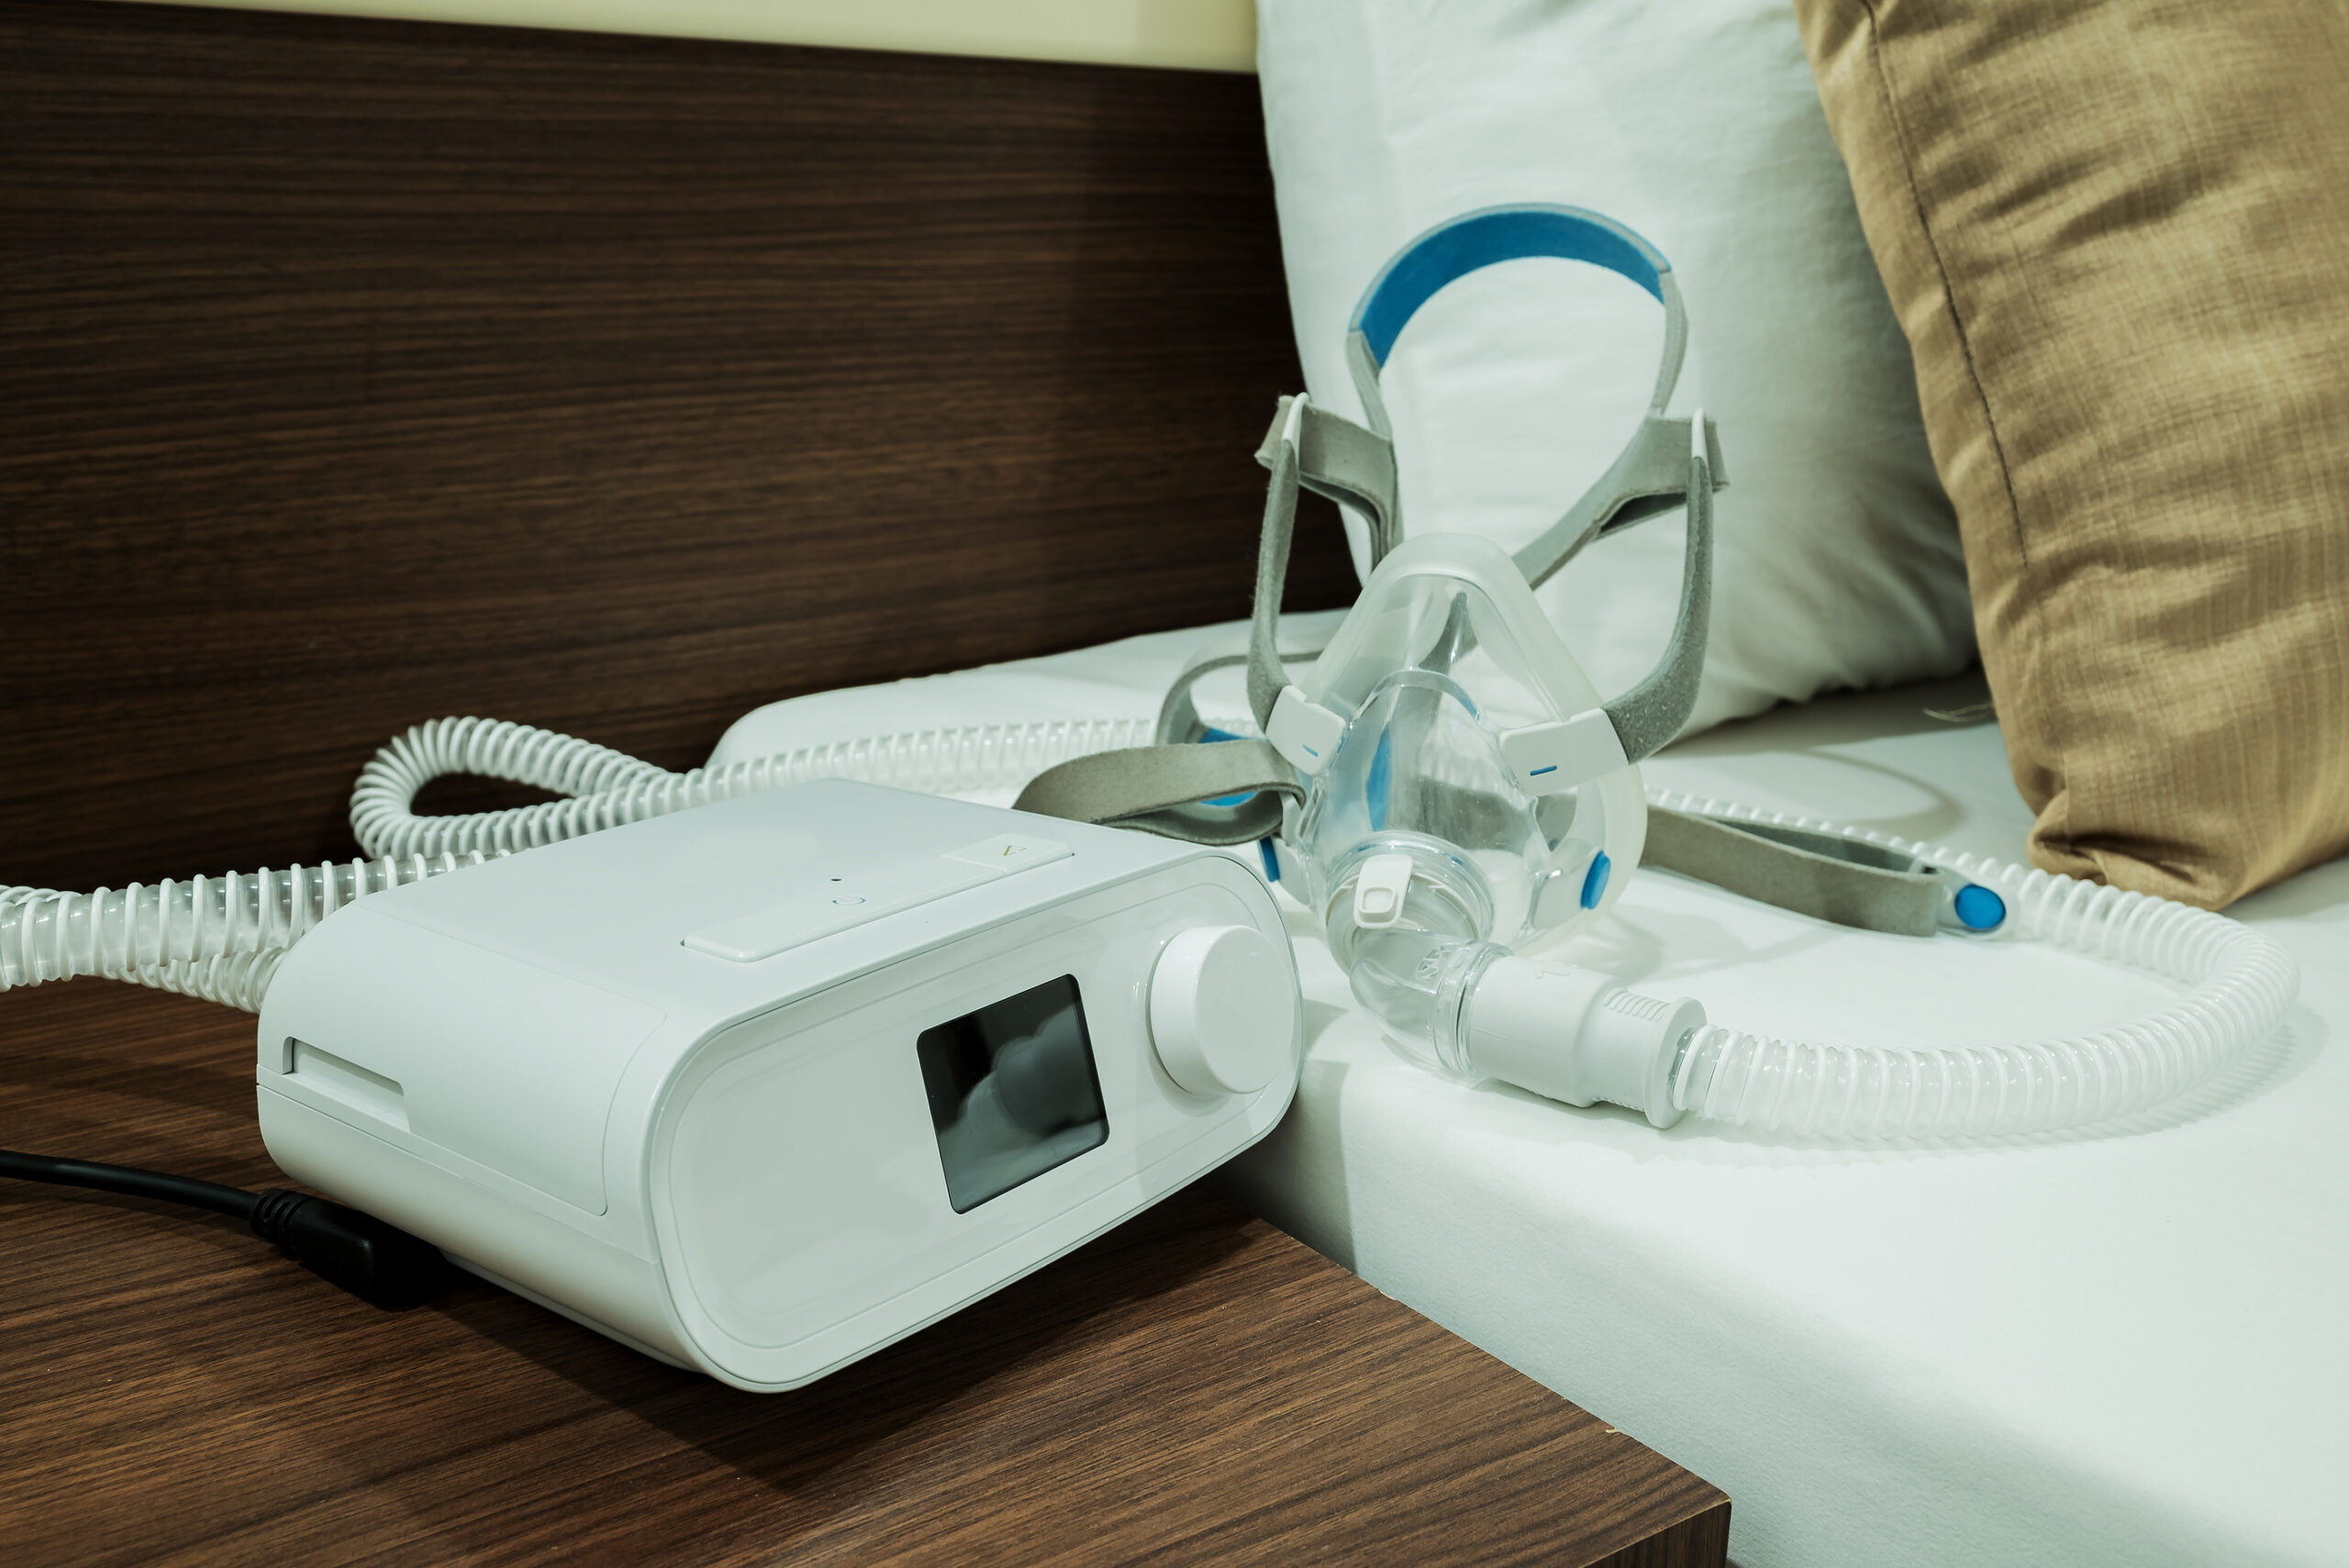 Additional Funds Set Aside by Philips Respironics to Compensate CPAP Plaintiffs